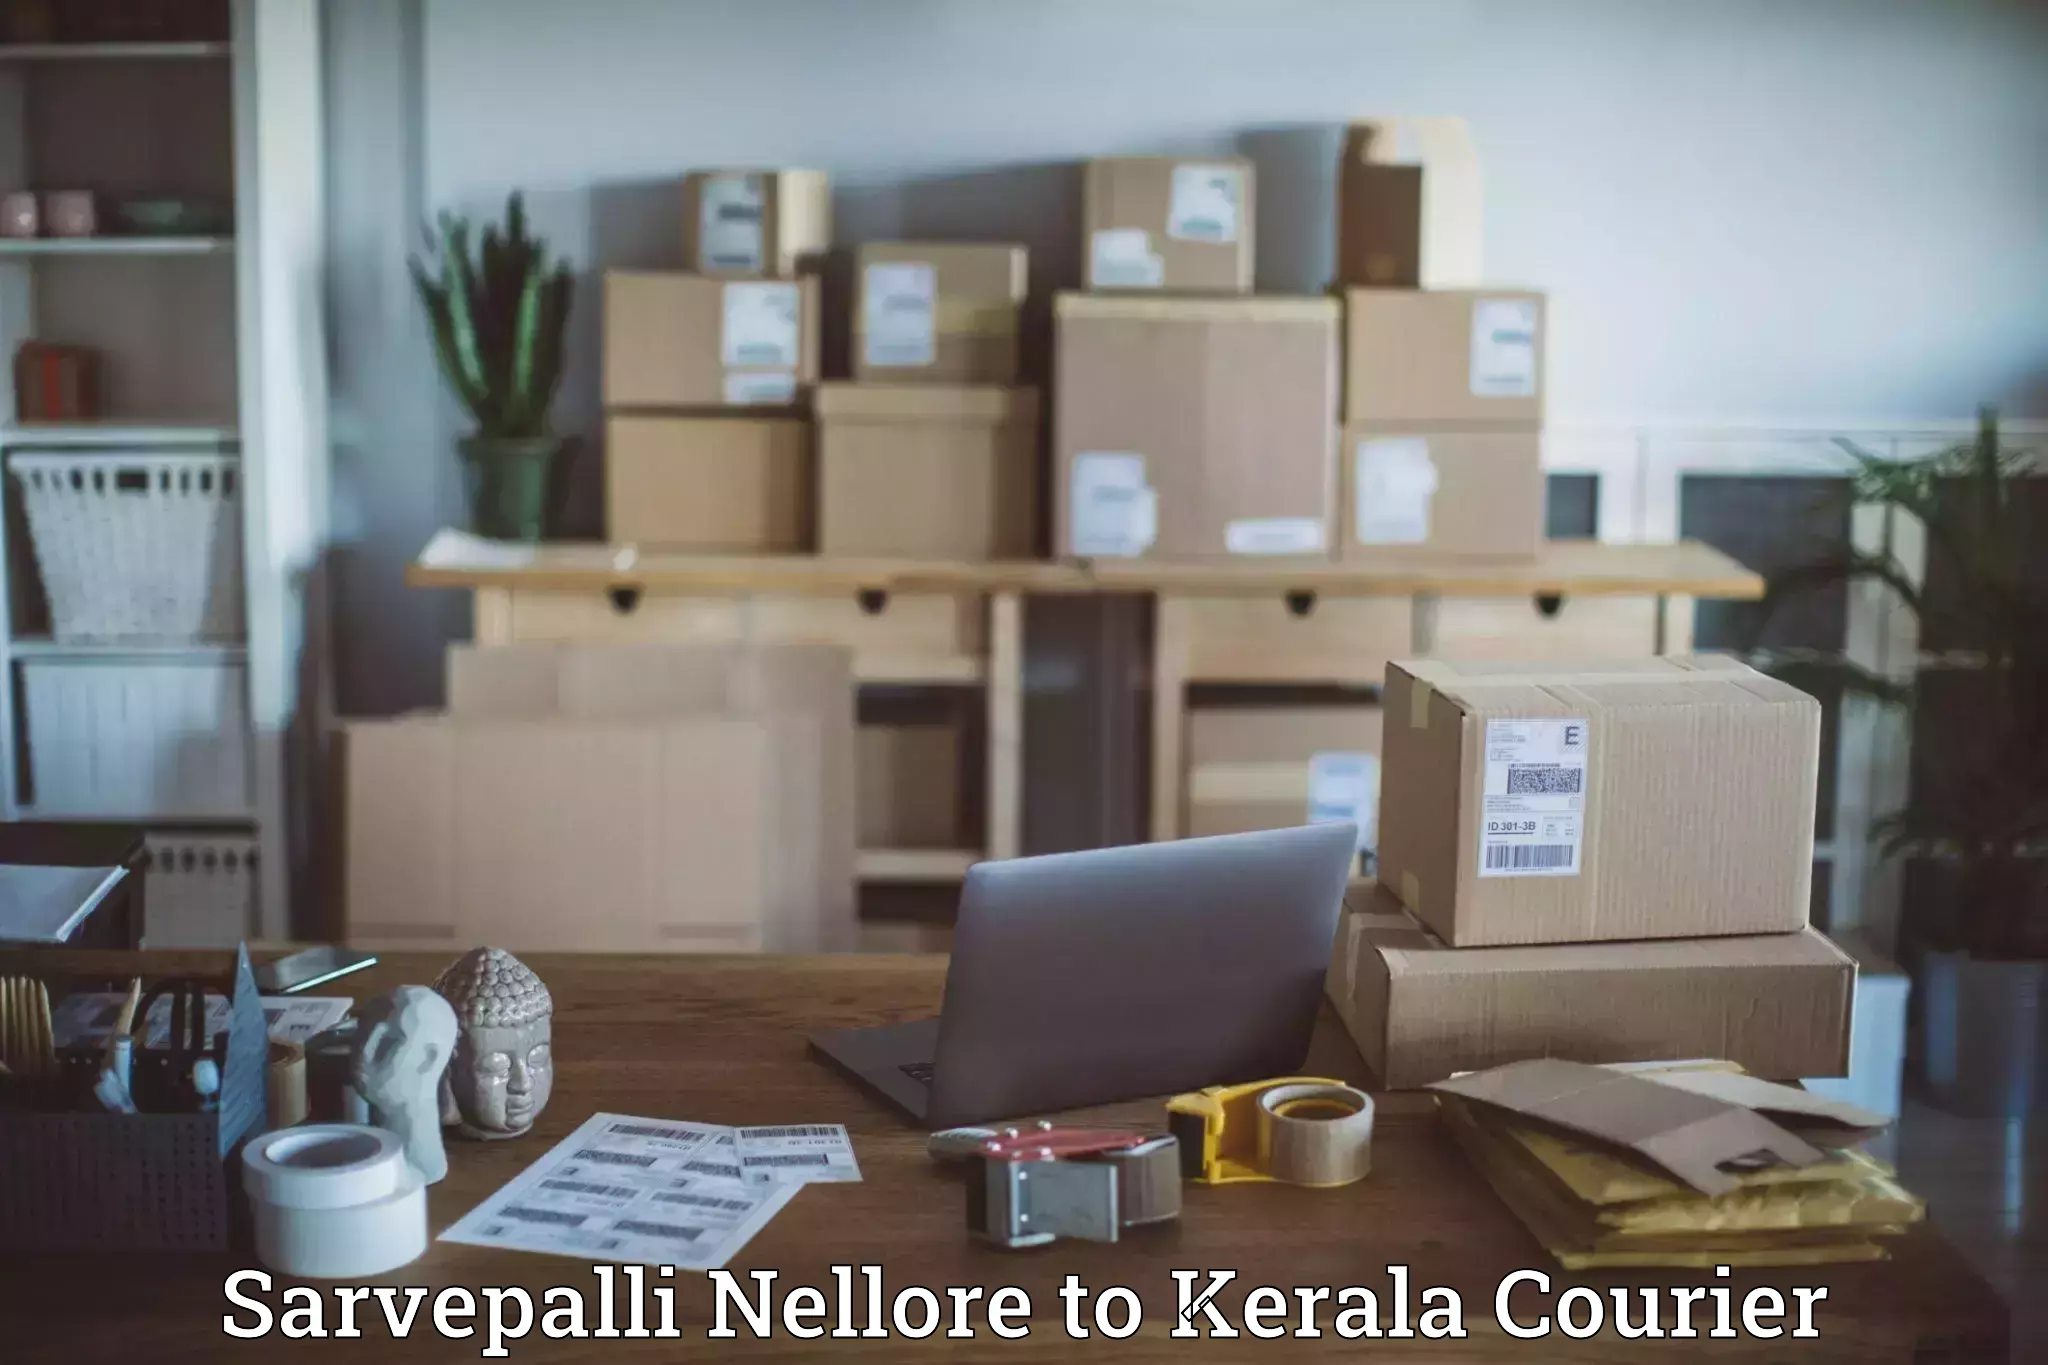 Customizable delivery plans Sarvepalli Nellore to Punalur